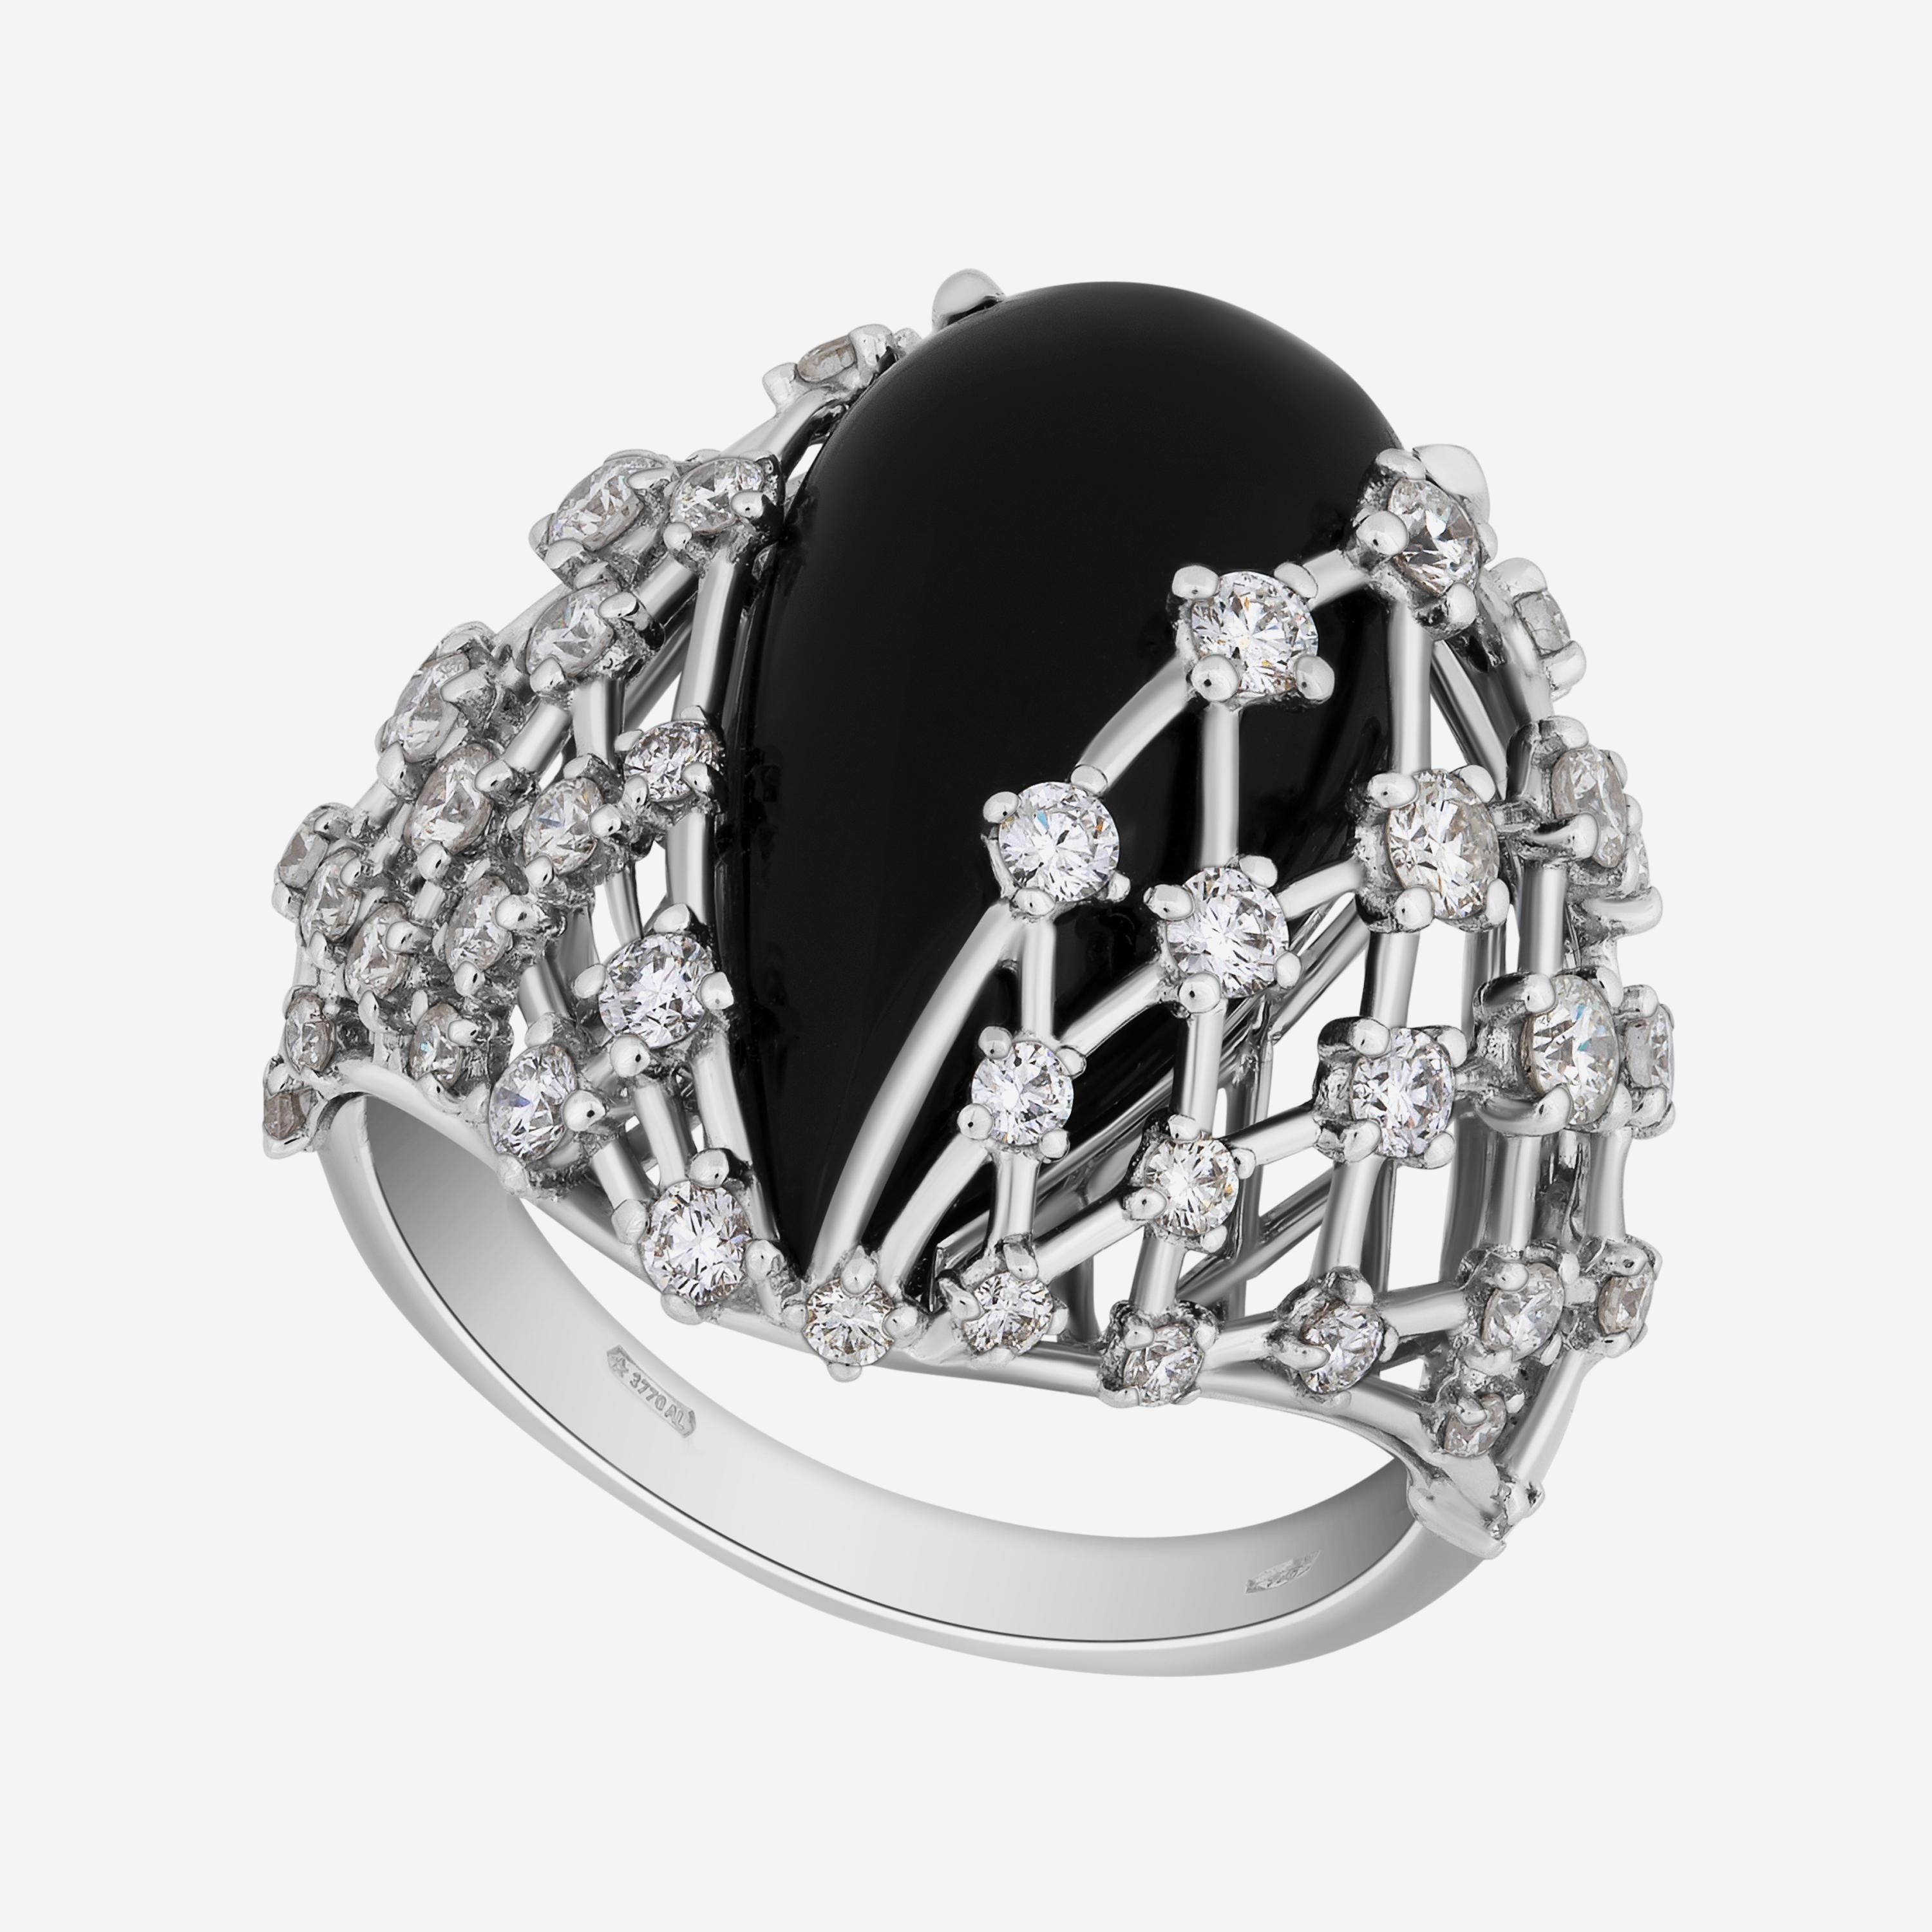 Contemporary Luca Carati 18K White Gold, Onyx and Diamond Ring sz 8.25 For Sale